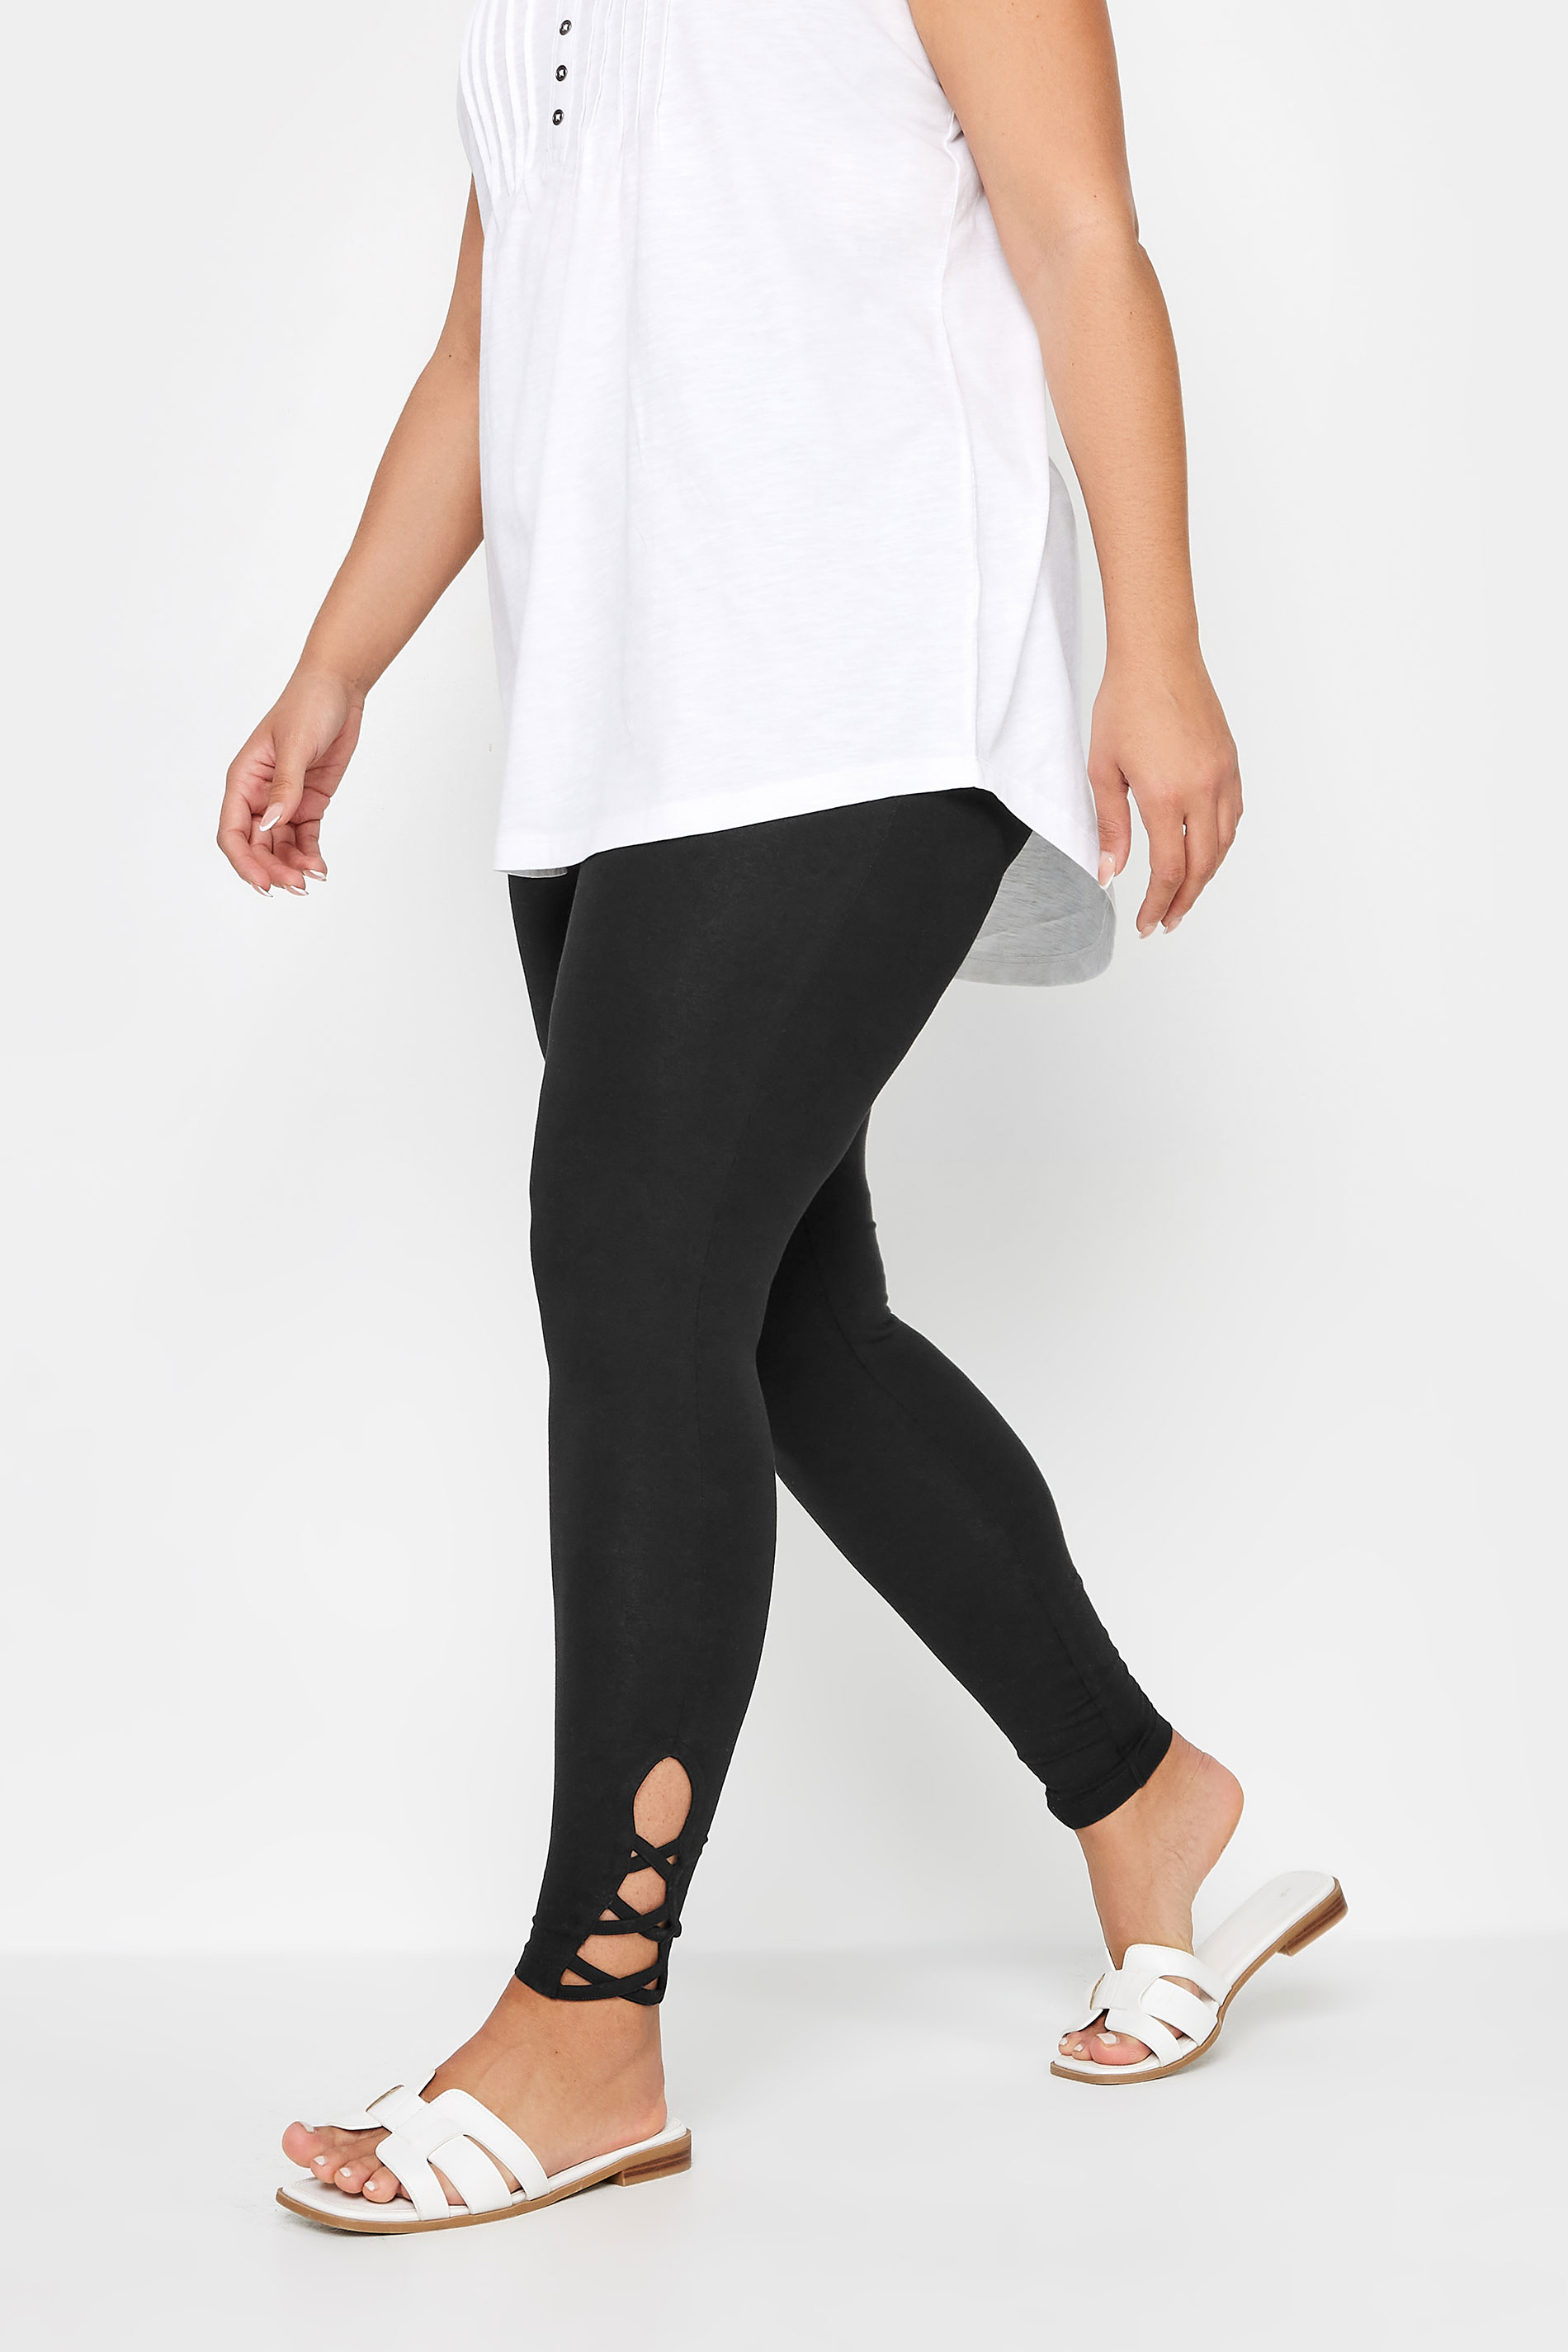 YOURS Plus Size Black Cut Out Leggings | Yours Clothing 1